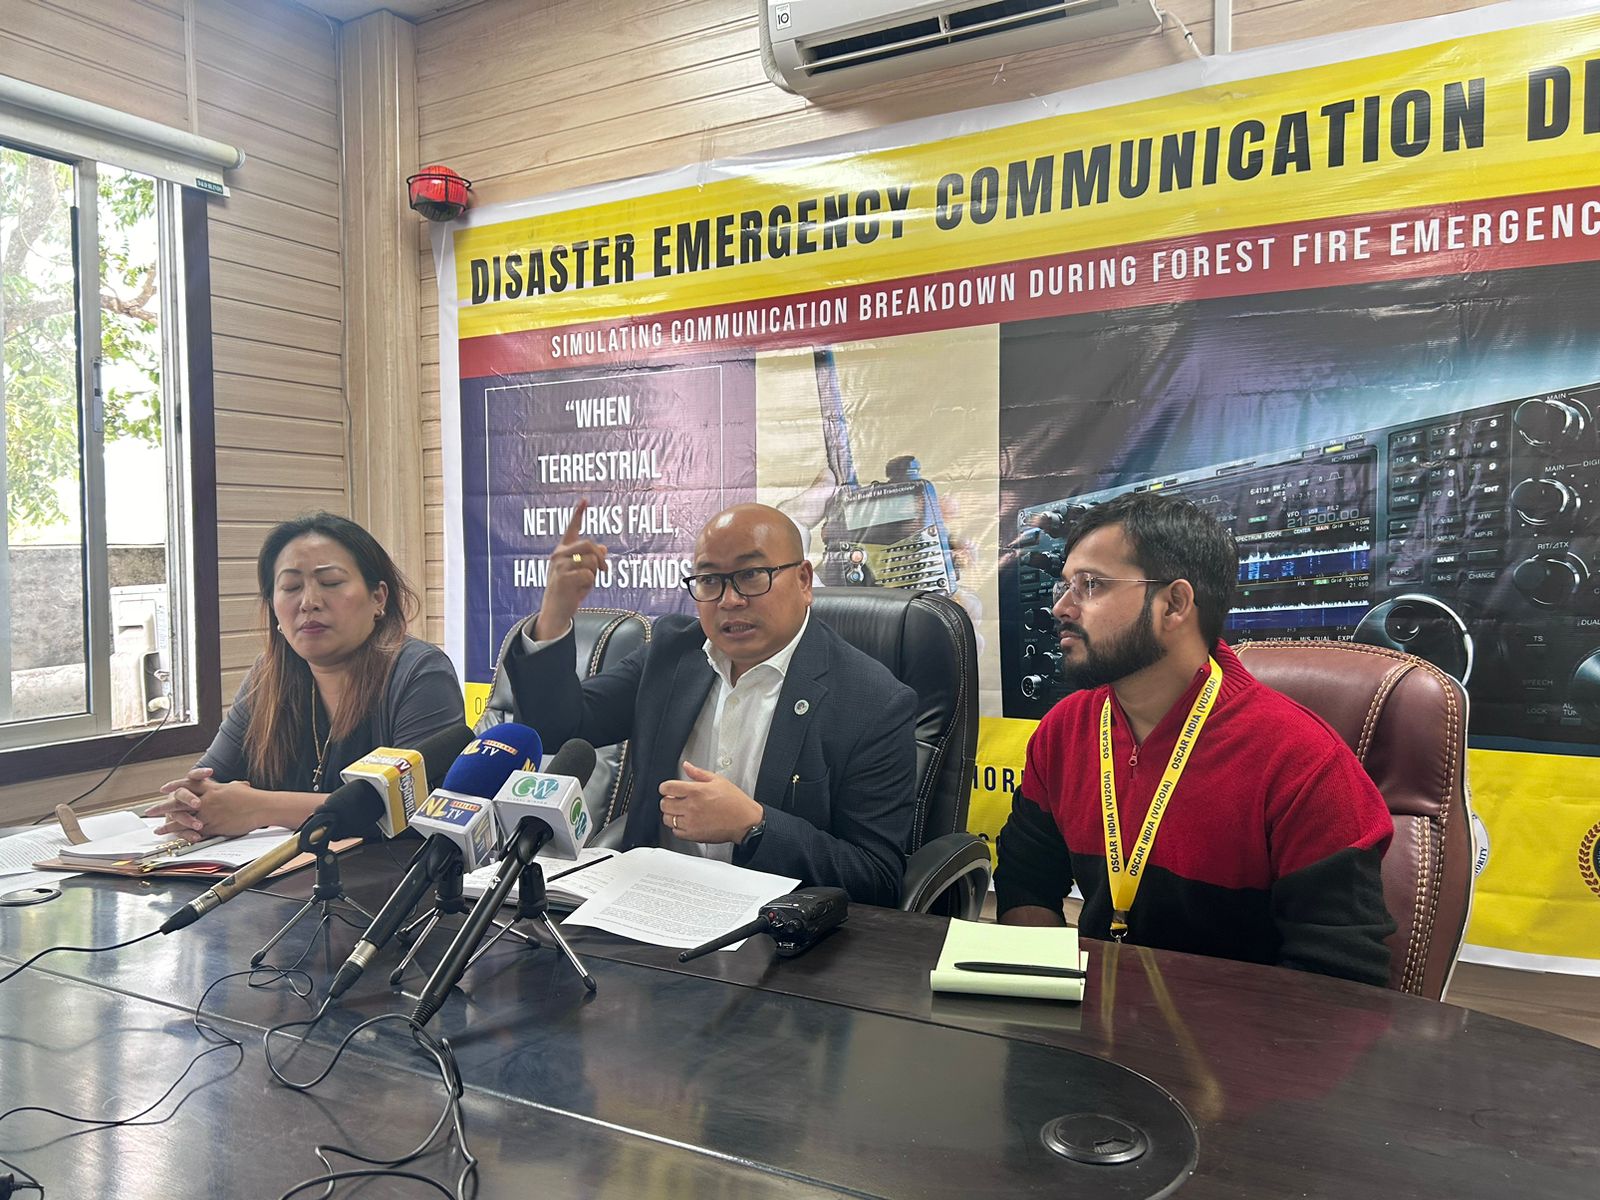 NSDMA and OSCAR INDIA to partner on disaster communication drills